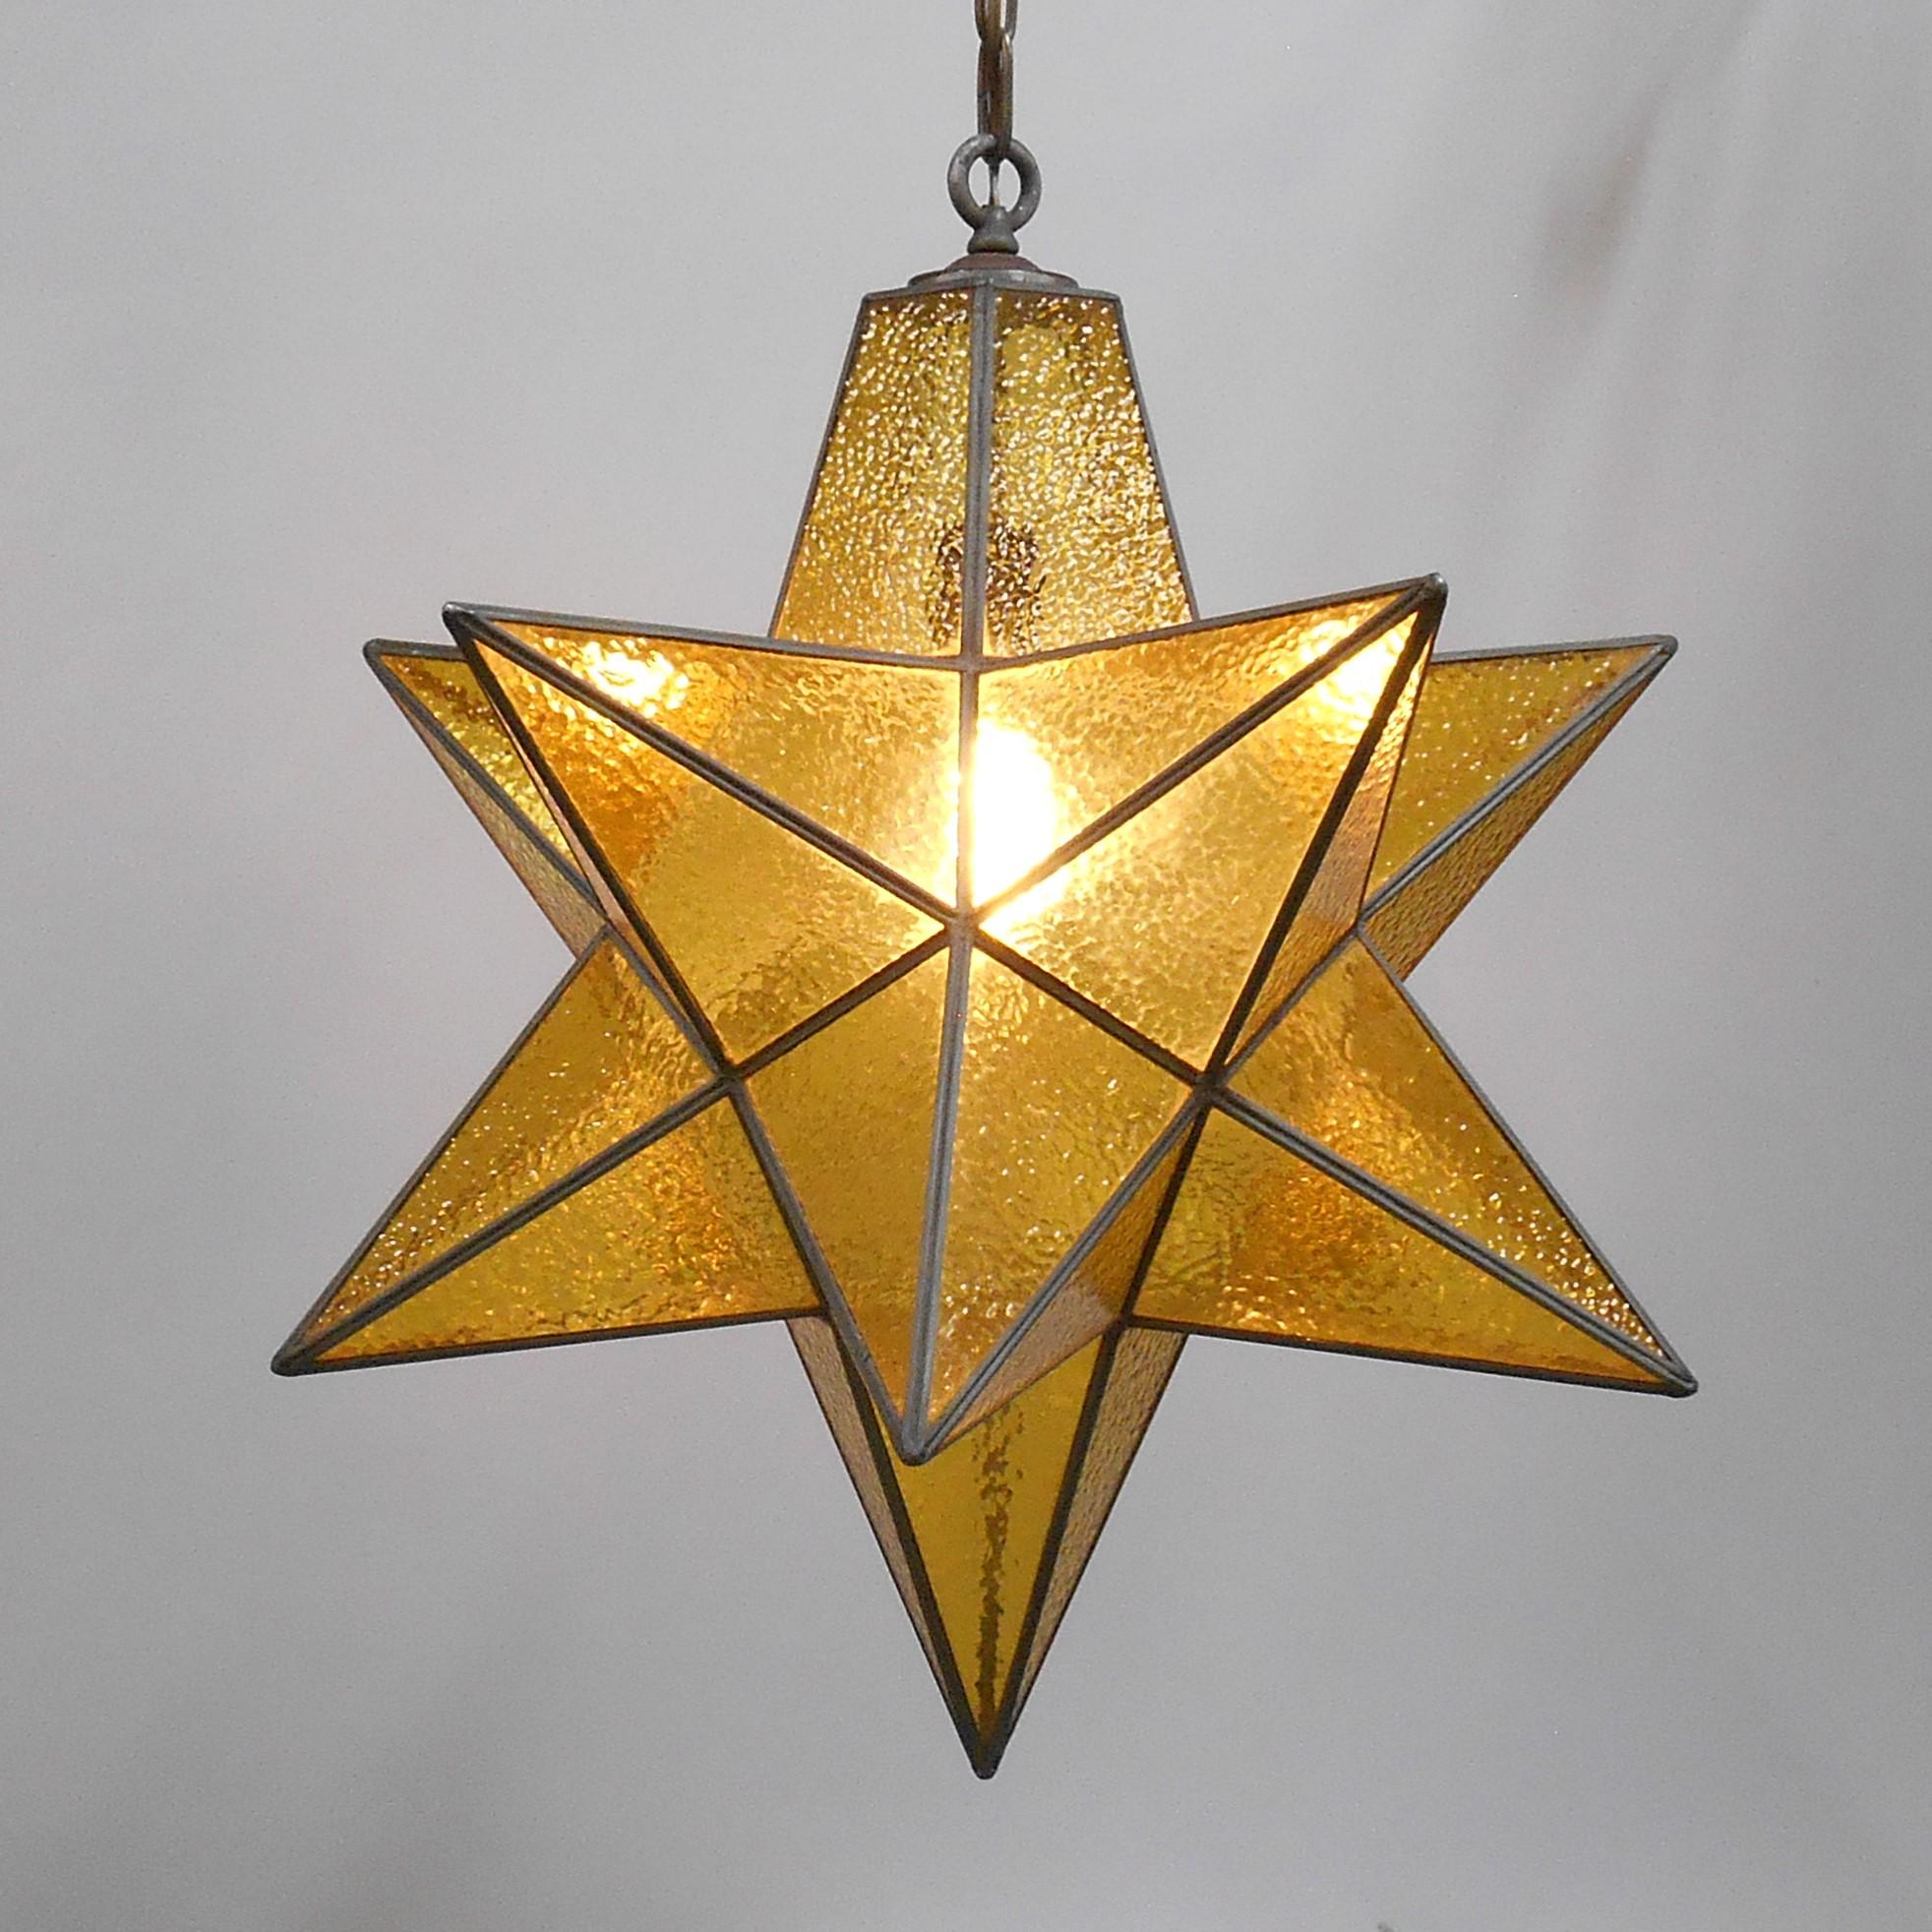 A beautiful Moravian star pendant with clear gold pebbled glass. This over scaled star has great presence. Wear consistent with age and use. There is one small crack in the glass located on a top surface on one of the top pyramidal extensions (shown